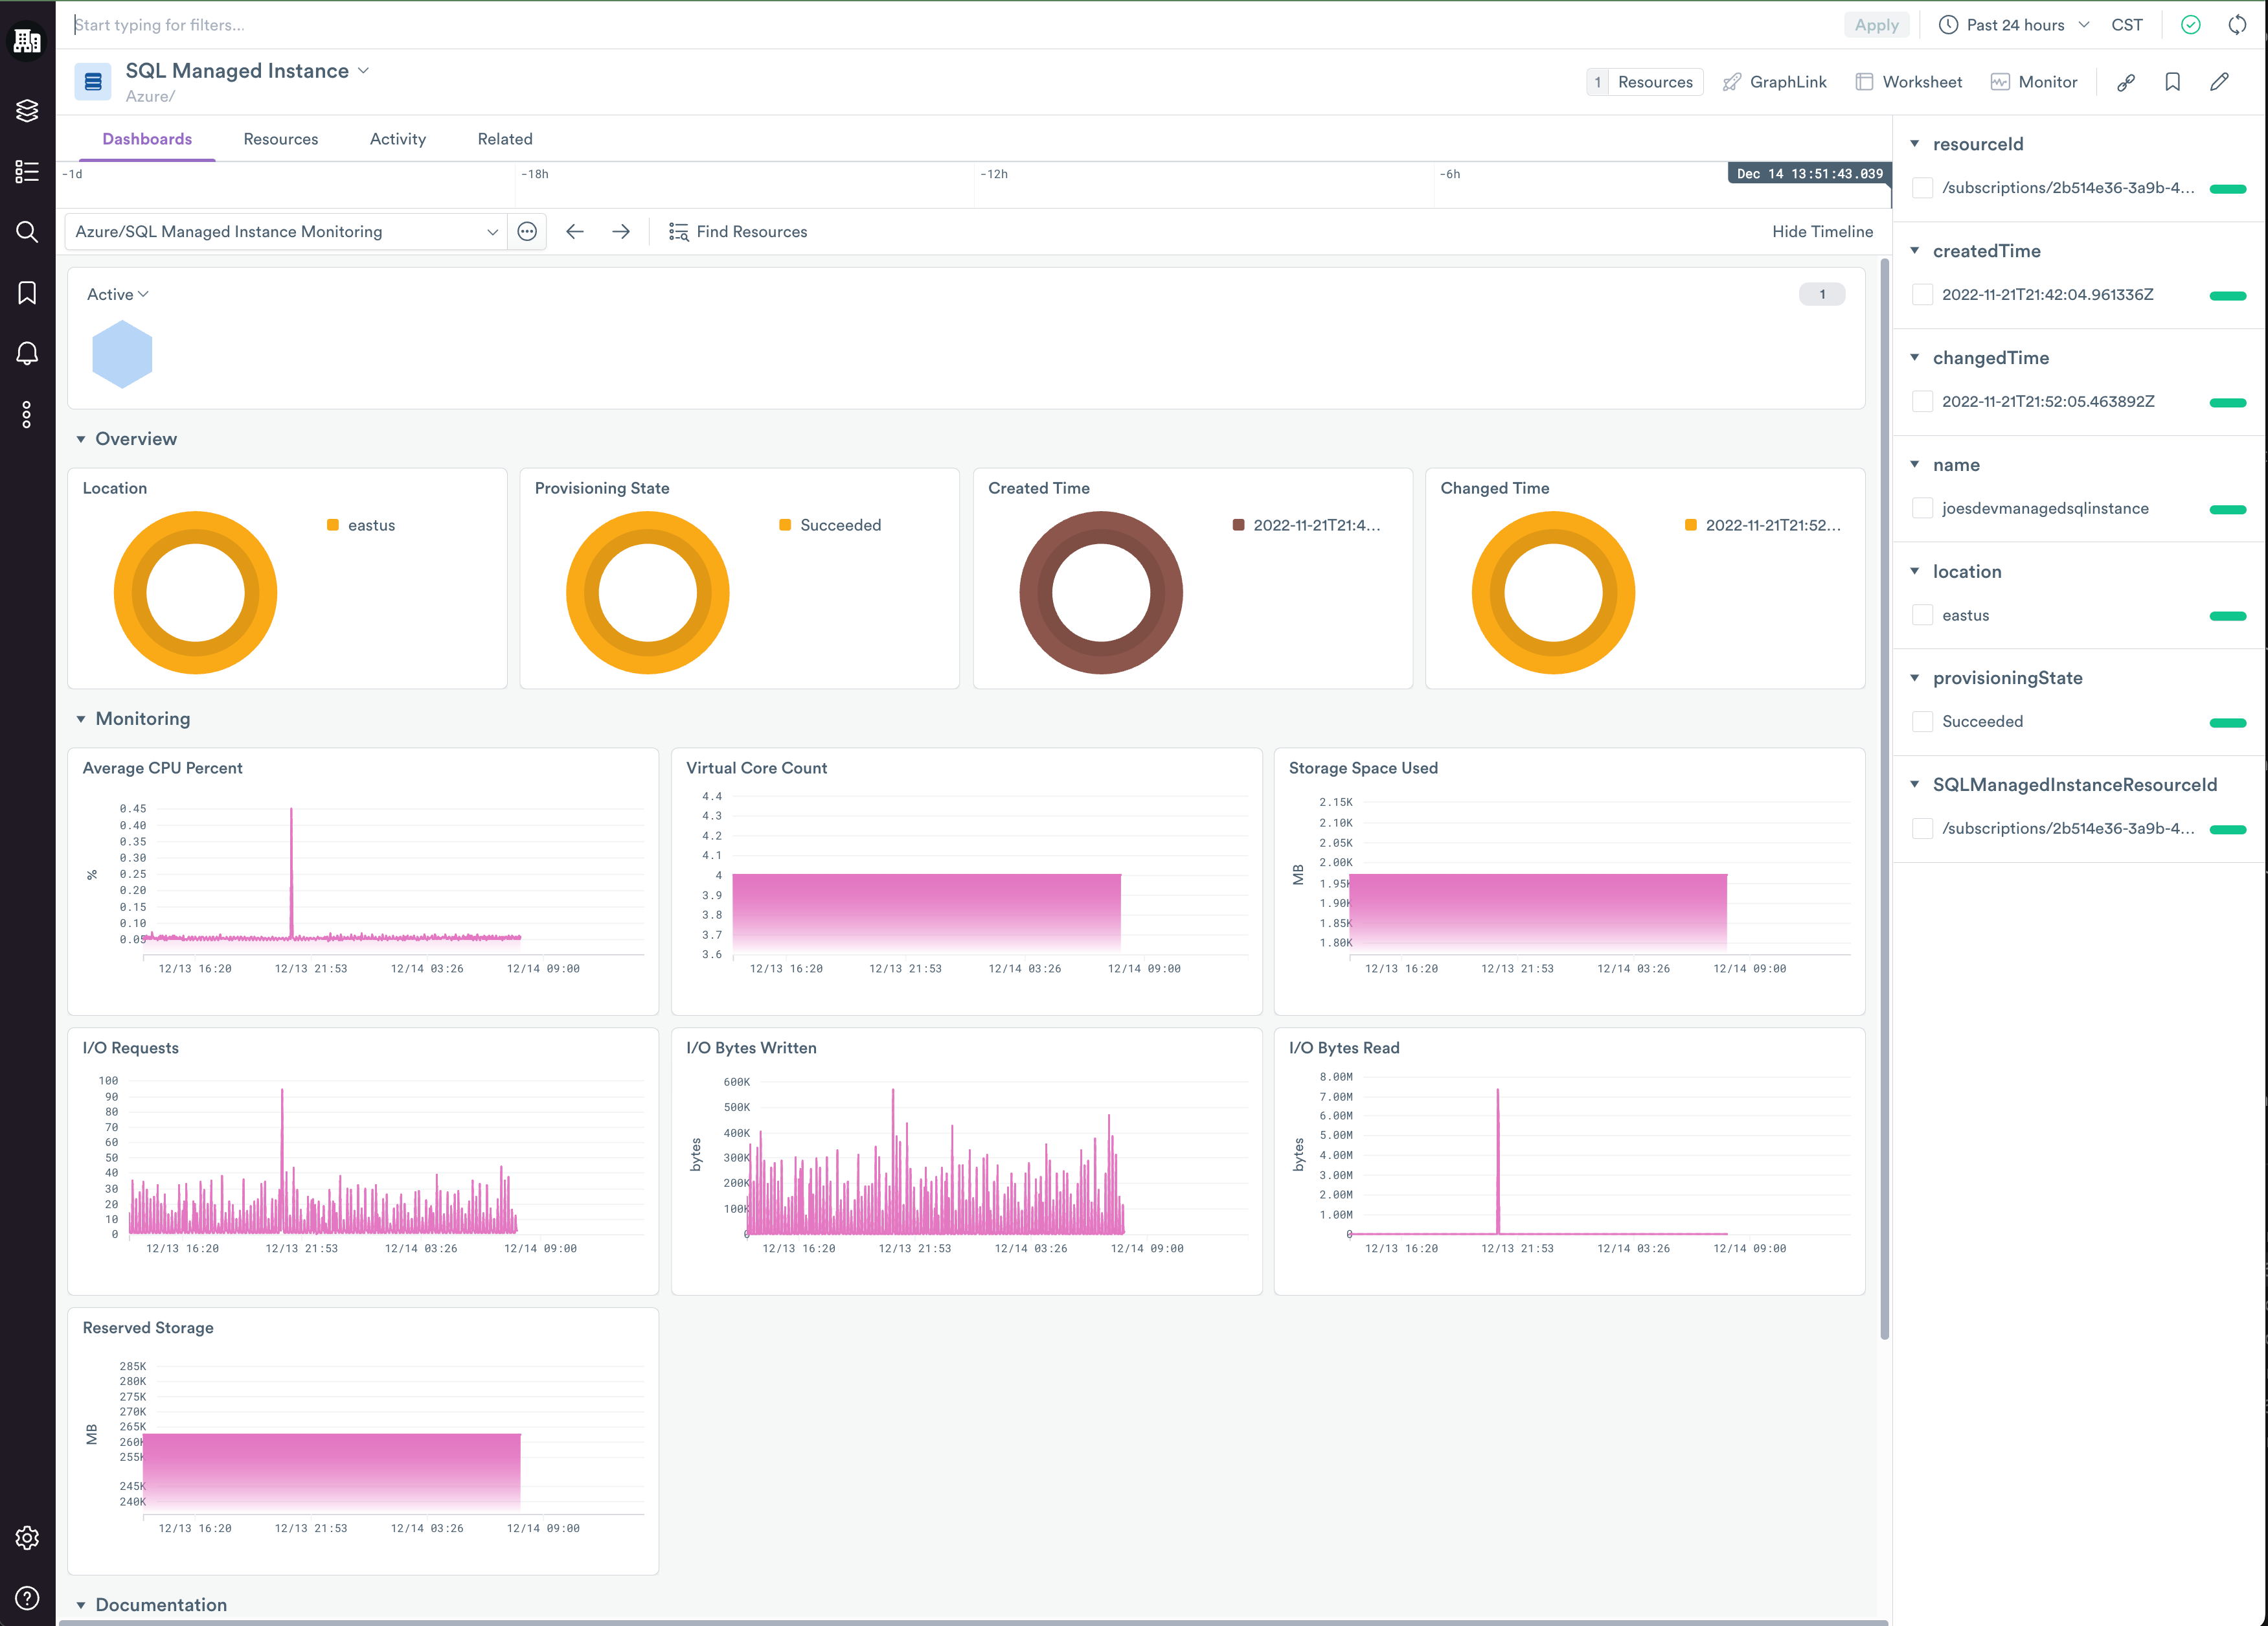 Monitoring dashboard for SQL Managed Instance